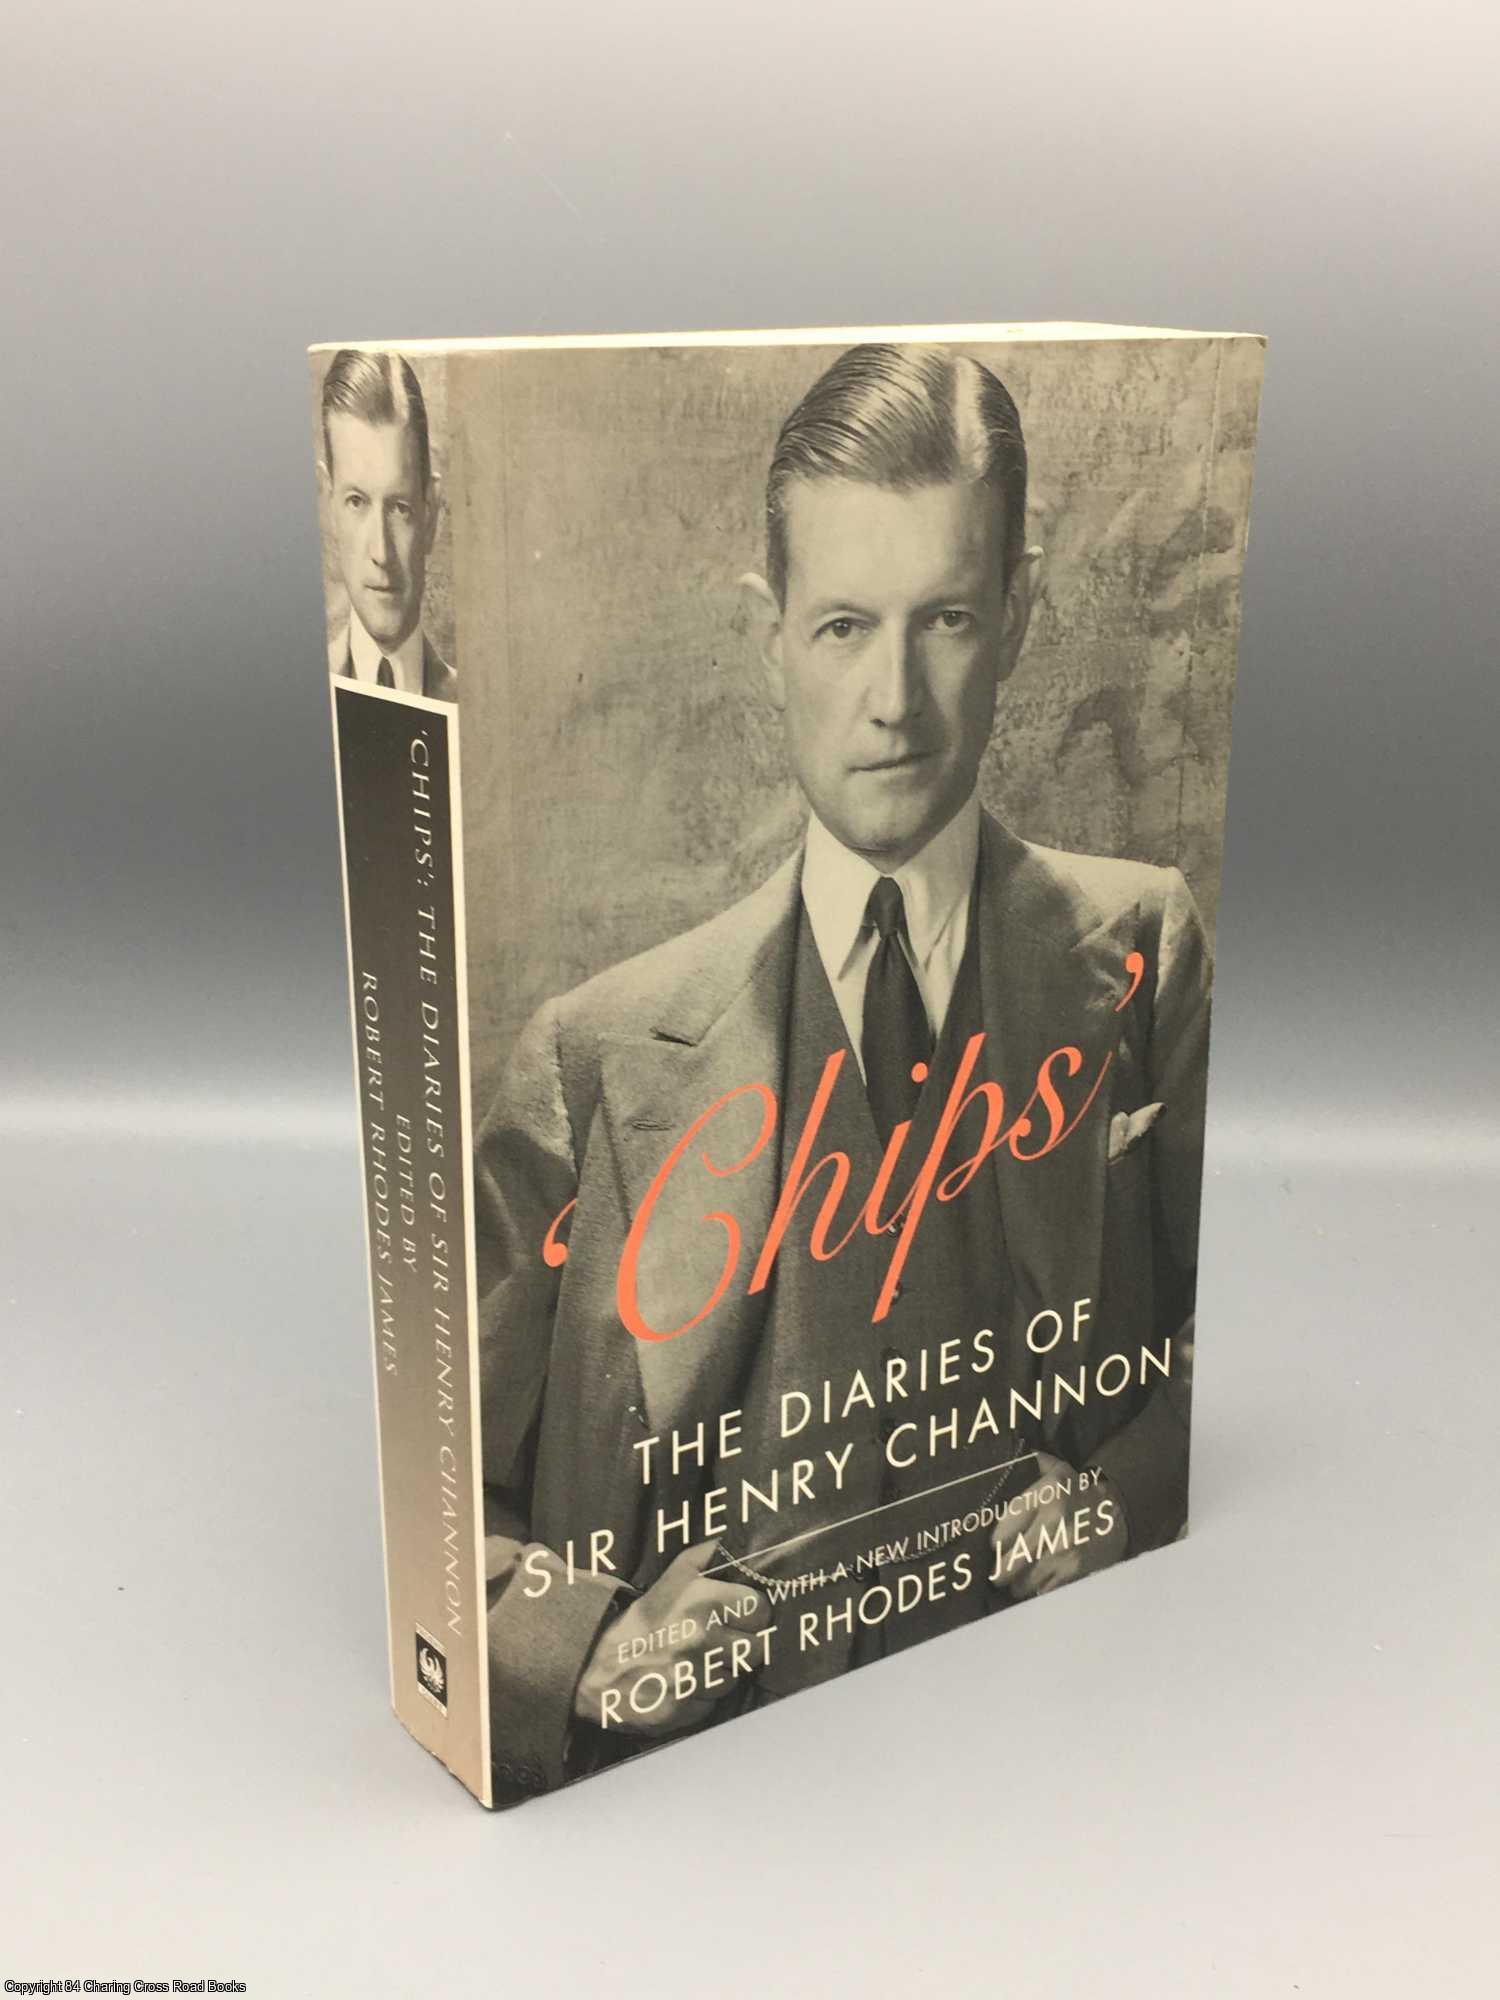 Channon, Chips; James, Robert Rhodes - Chips: Diaries of Sir Henry Channon